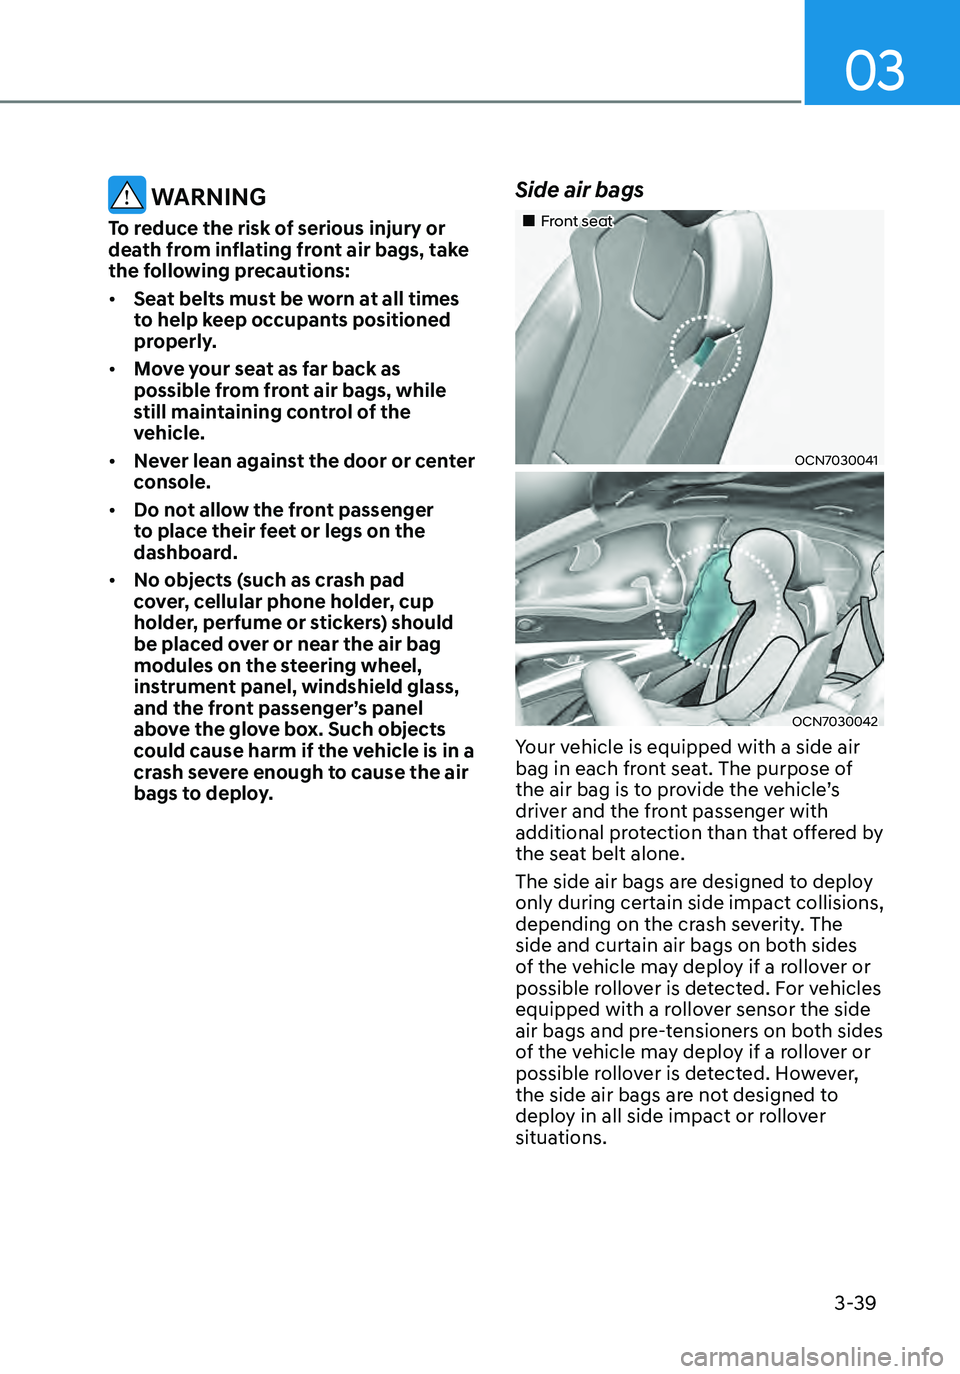 HYUNDAI ELANTRA HYBRID 2021  Owners Manual 03
3-39
 WARNING
To reduce the risk of serious injury or 
death from inflating front air bags, take 
the following precautions:
•	Seat belts must be worn at all times 
to help keep occupants positio